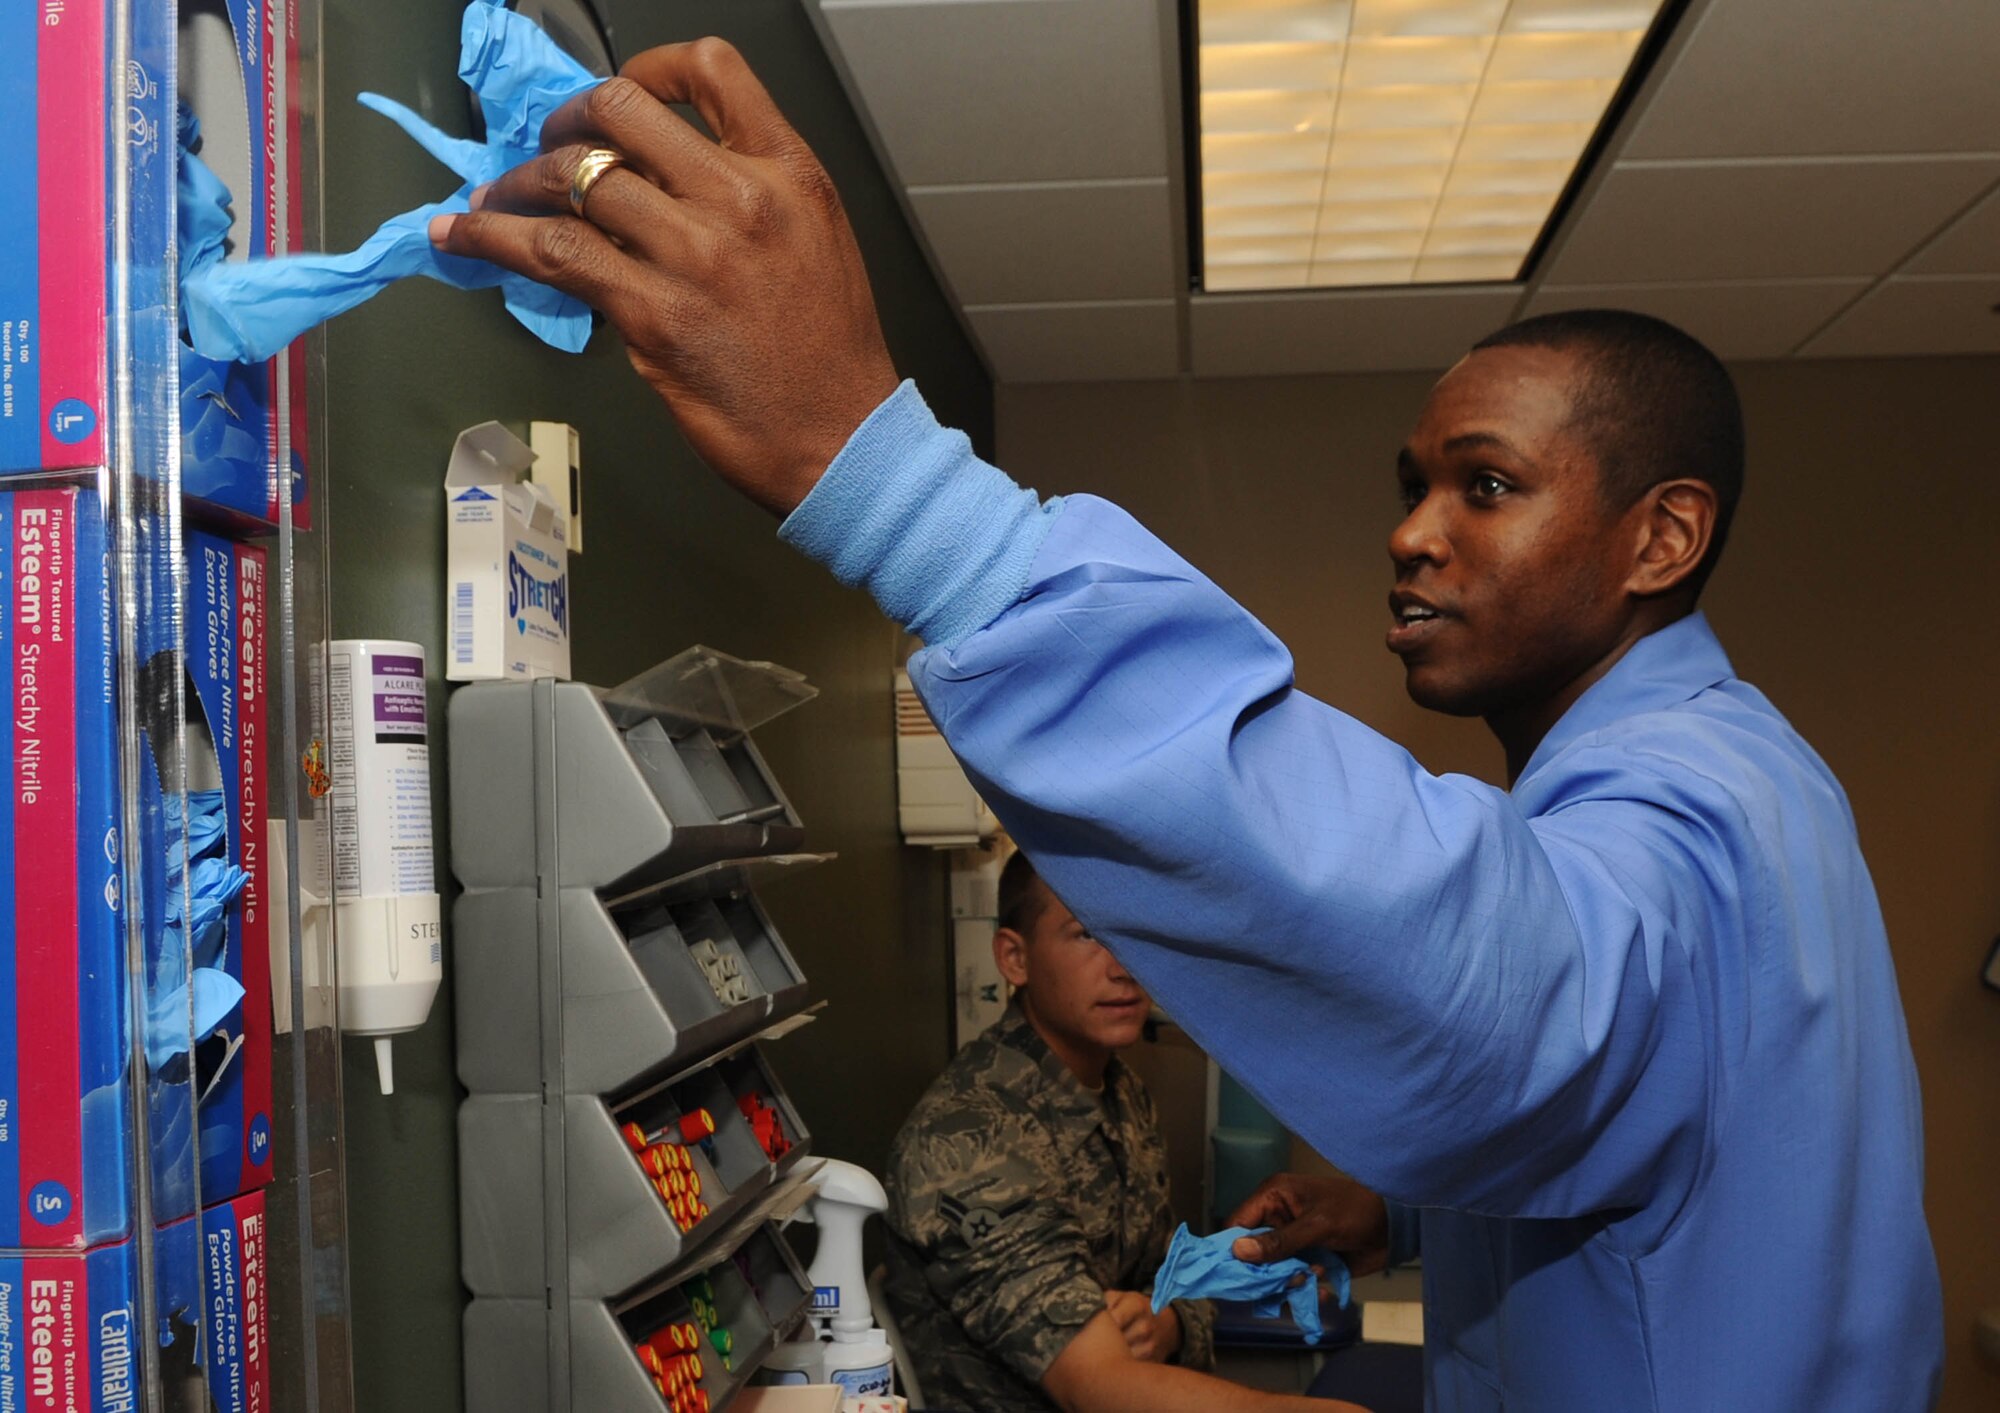 Staff Sgt. Terrance Raybon, 2nd Support Squadron, grabs a glove before collecting an airman's blood at the clinic on Barkdale Air Force Base, La., Jun 15. Blood tests are used to determine physiological and biochemical states, such as disease, mineral content, drug effectiveness and organ function. (U.S. Air Force photo/Senior Airman Kristin High)(RELEASED)